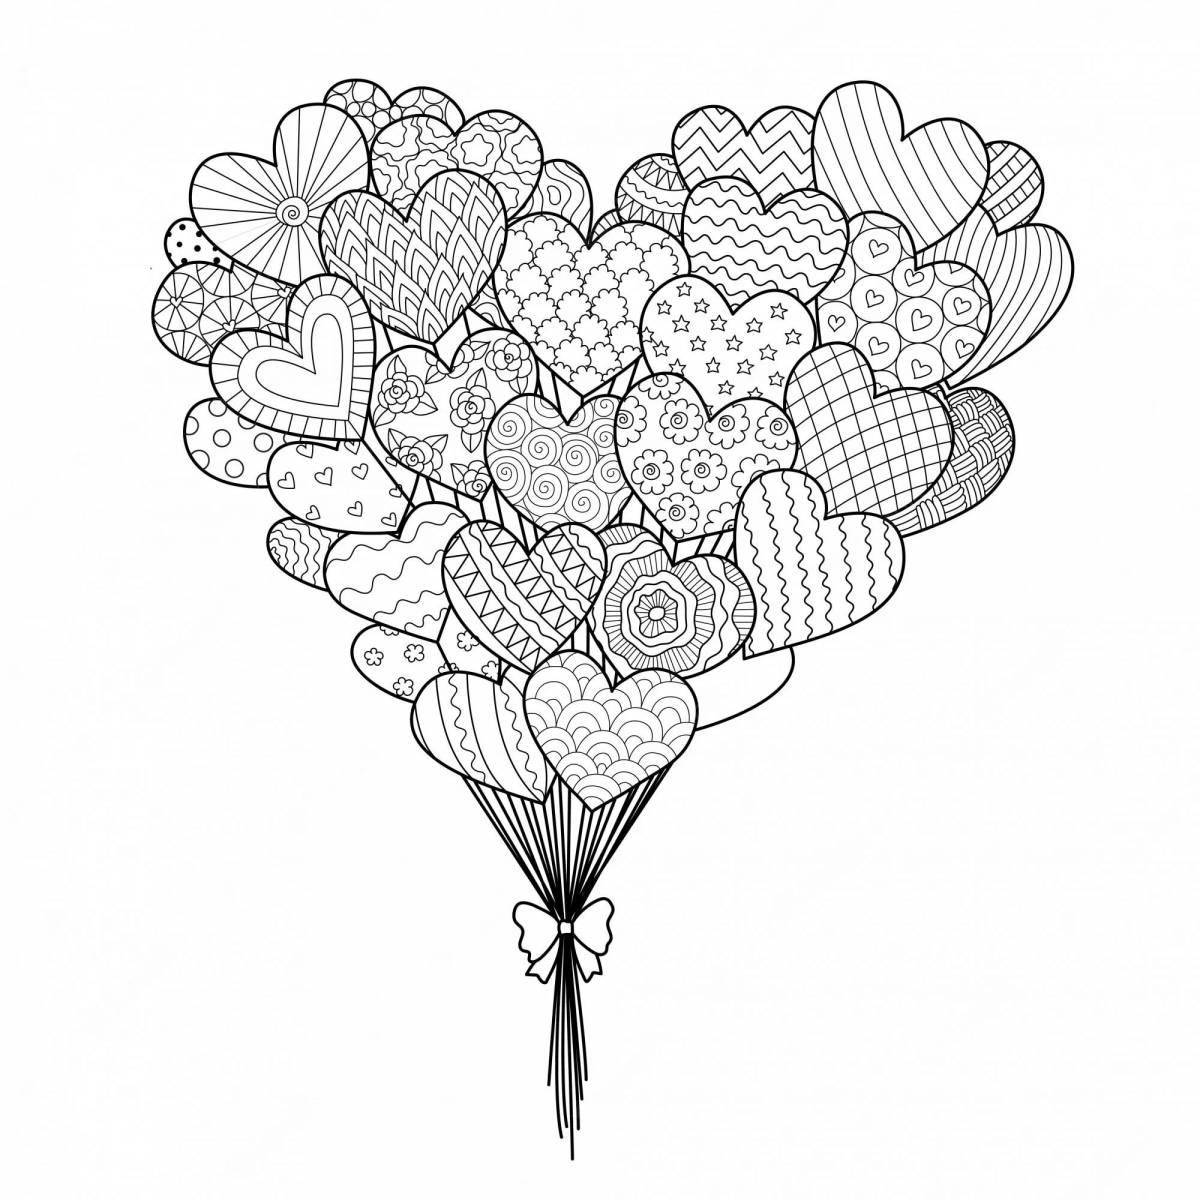 Coloring book playful bunch of balloons